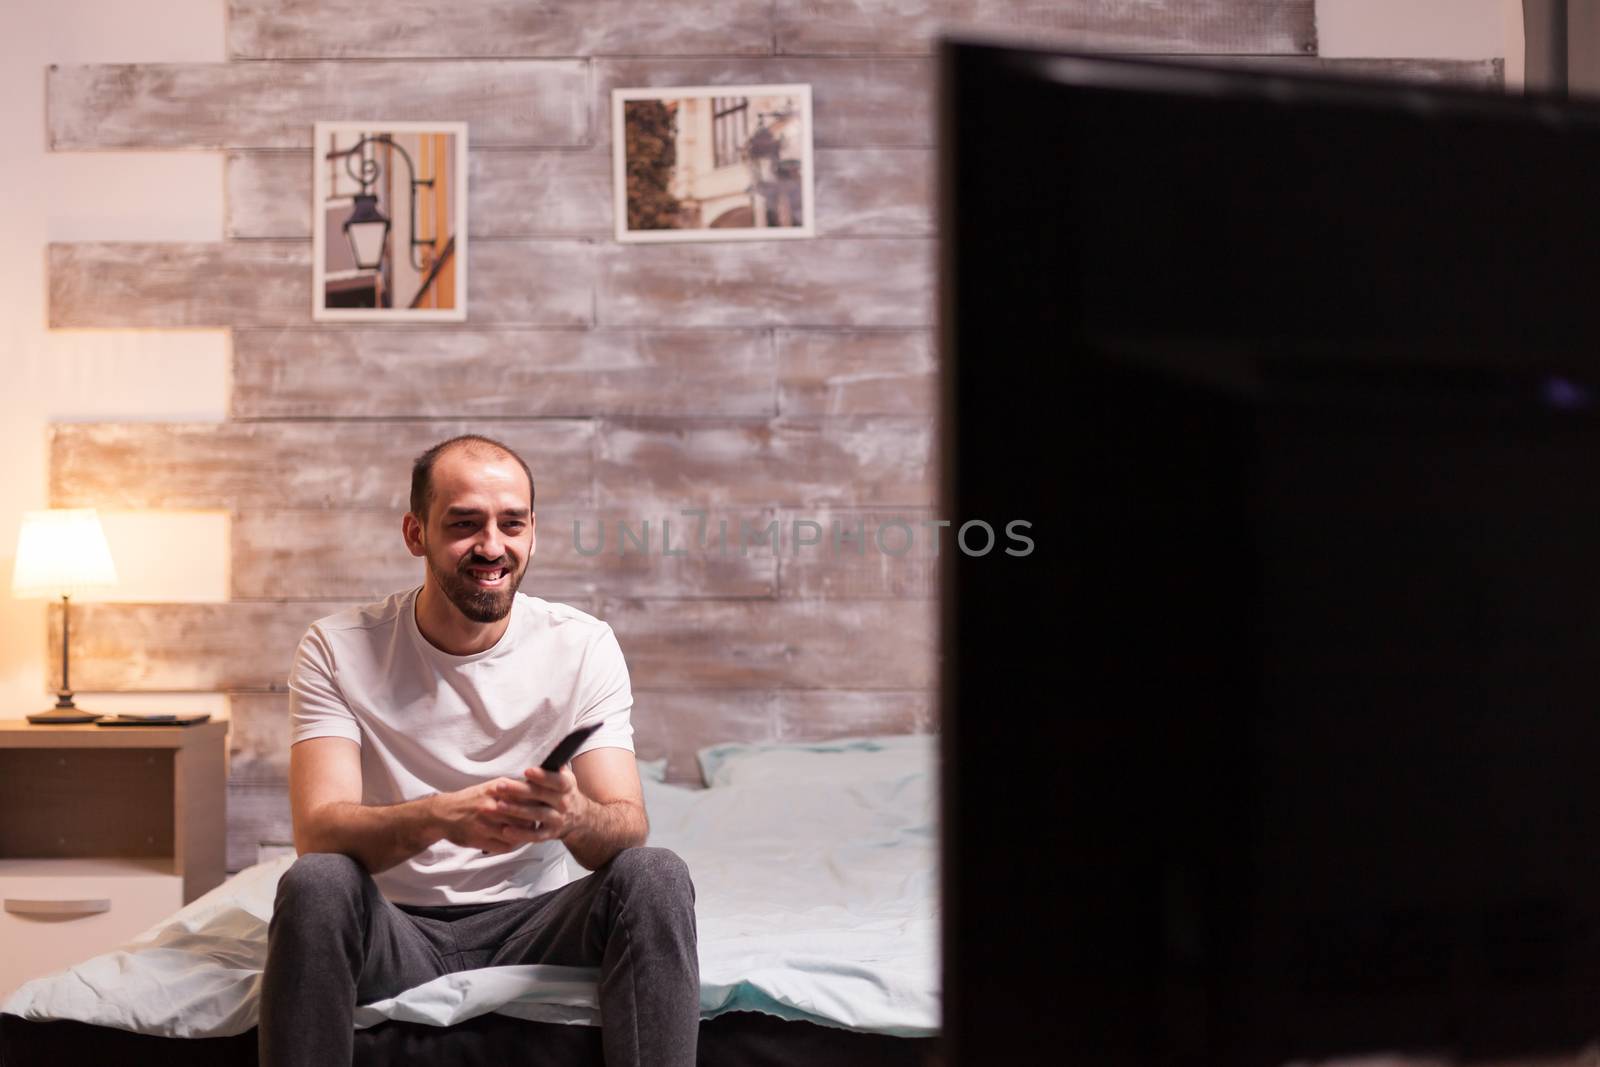 Man with a big smile holding remote control while watching tv at night.